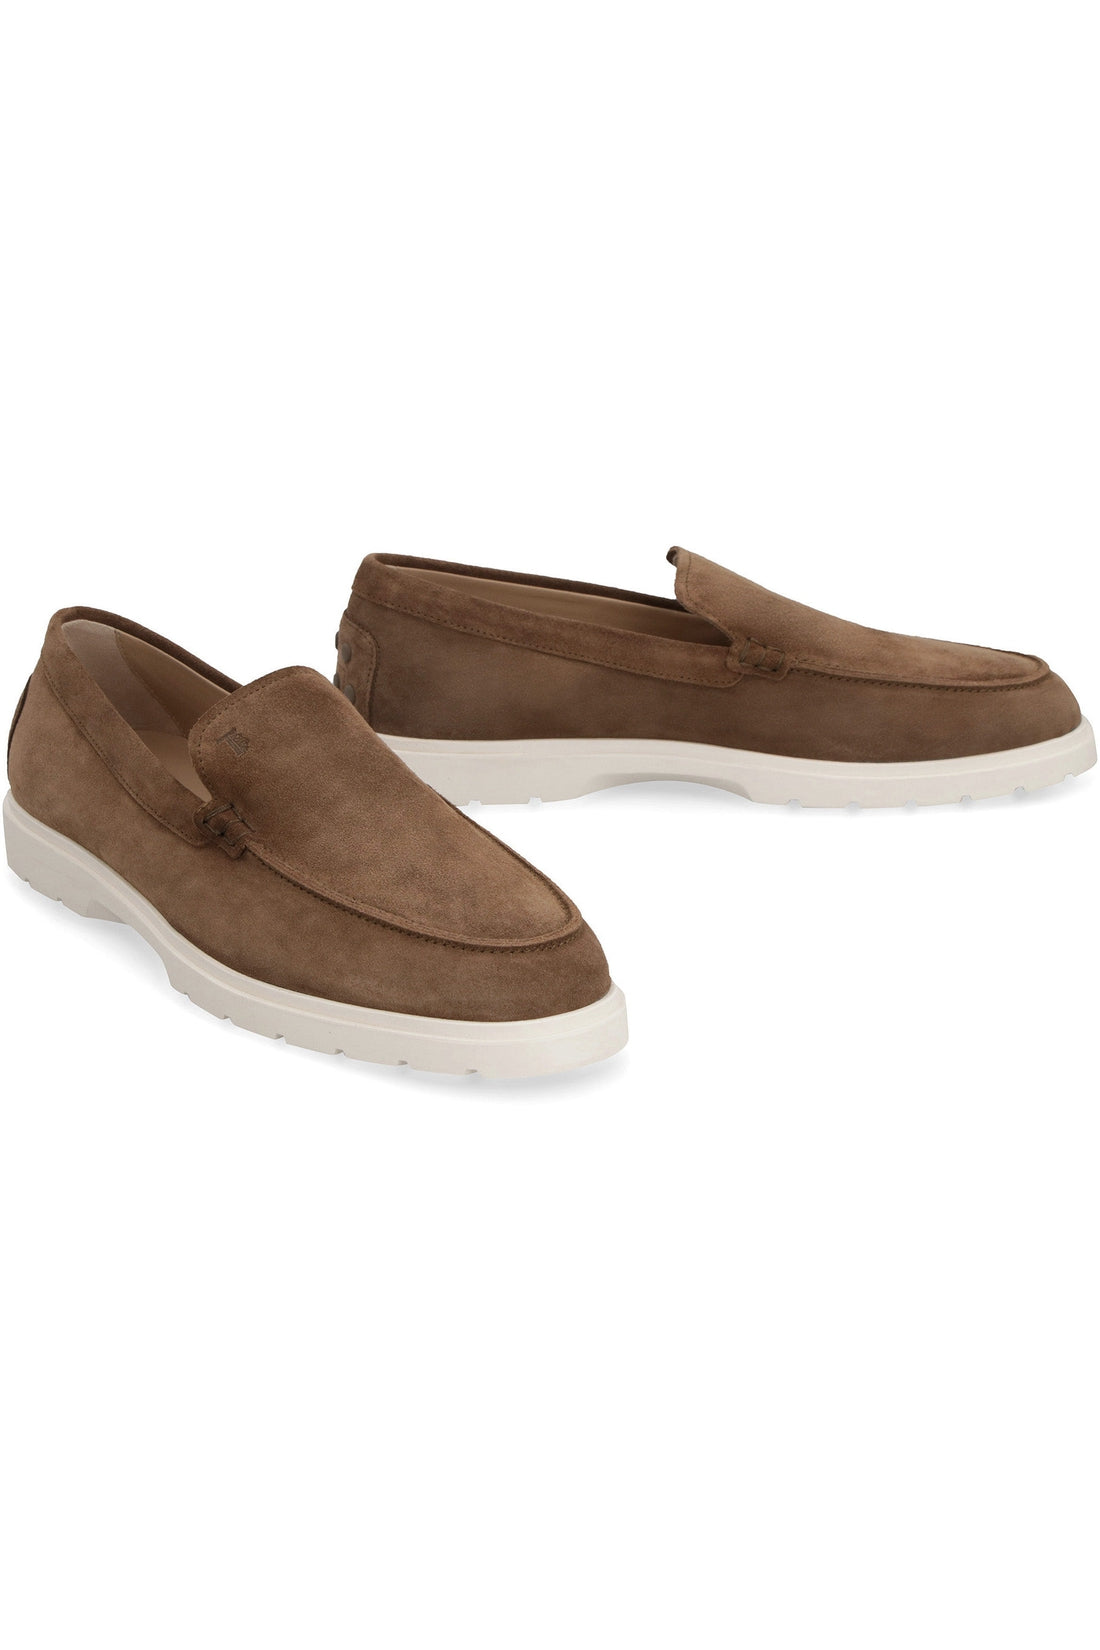 Tod's-OUTLET-SALE-Pantofola suede loafers-ARCHIVIST